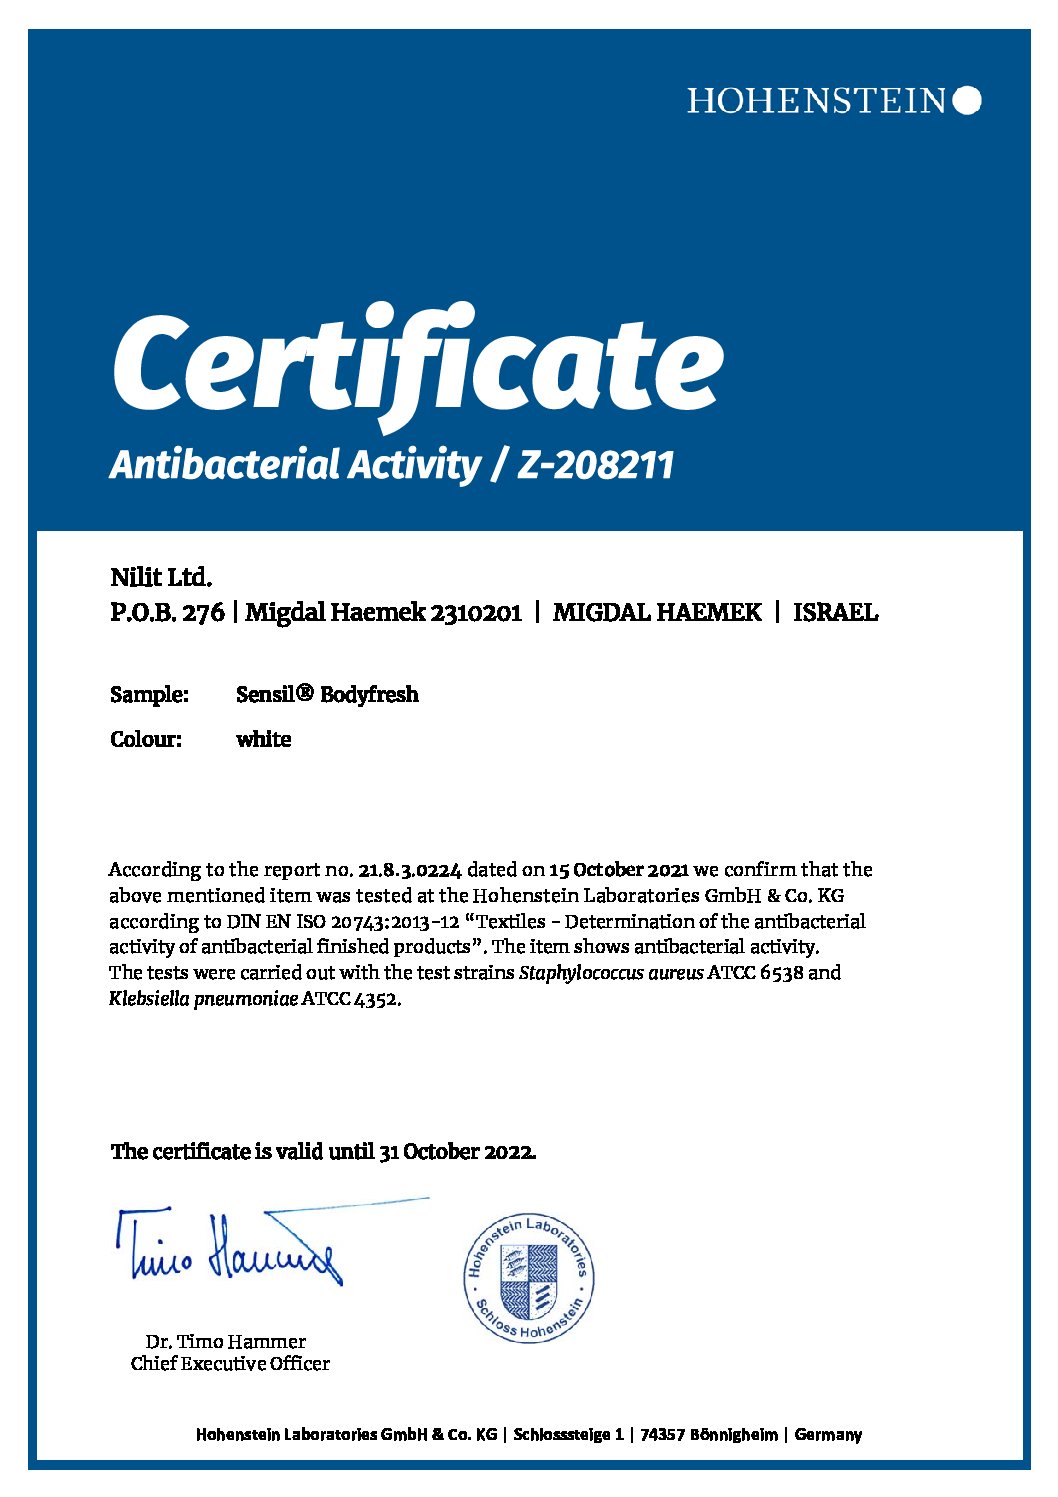 Antimicrobial Certification